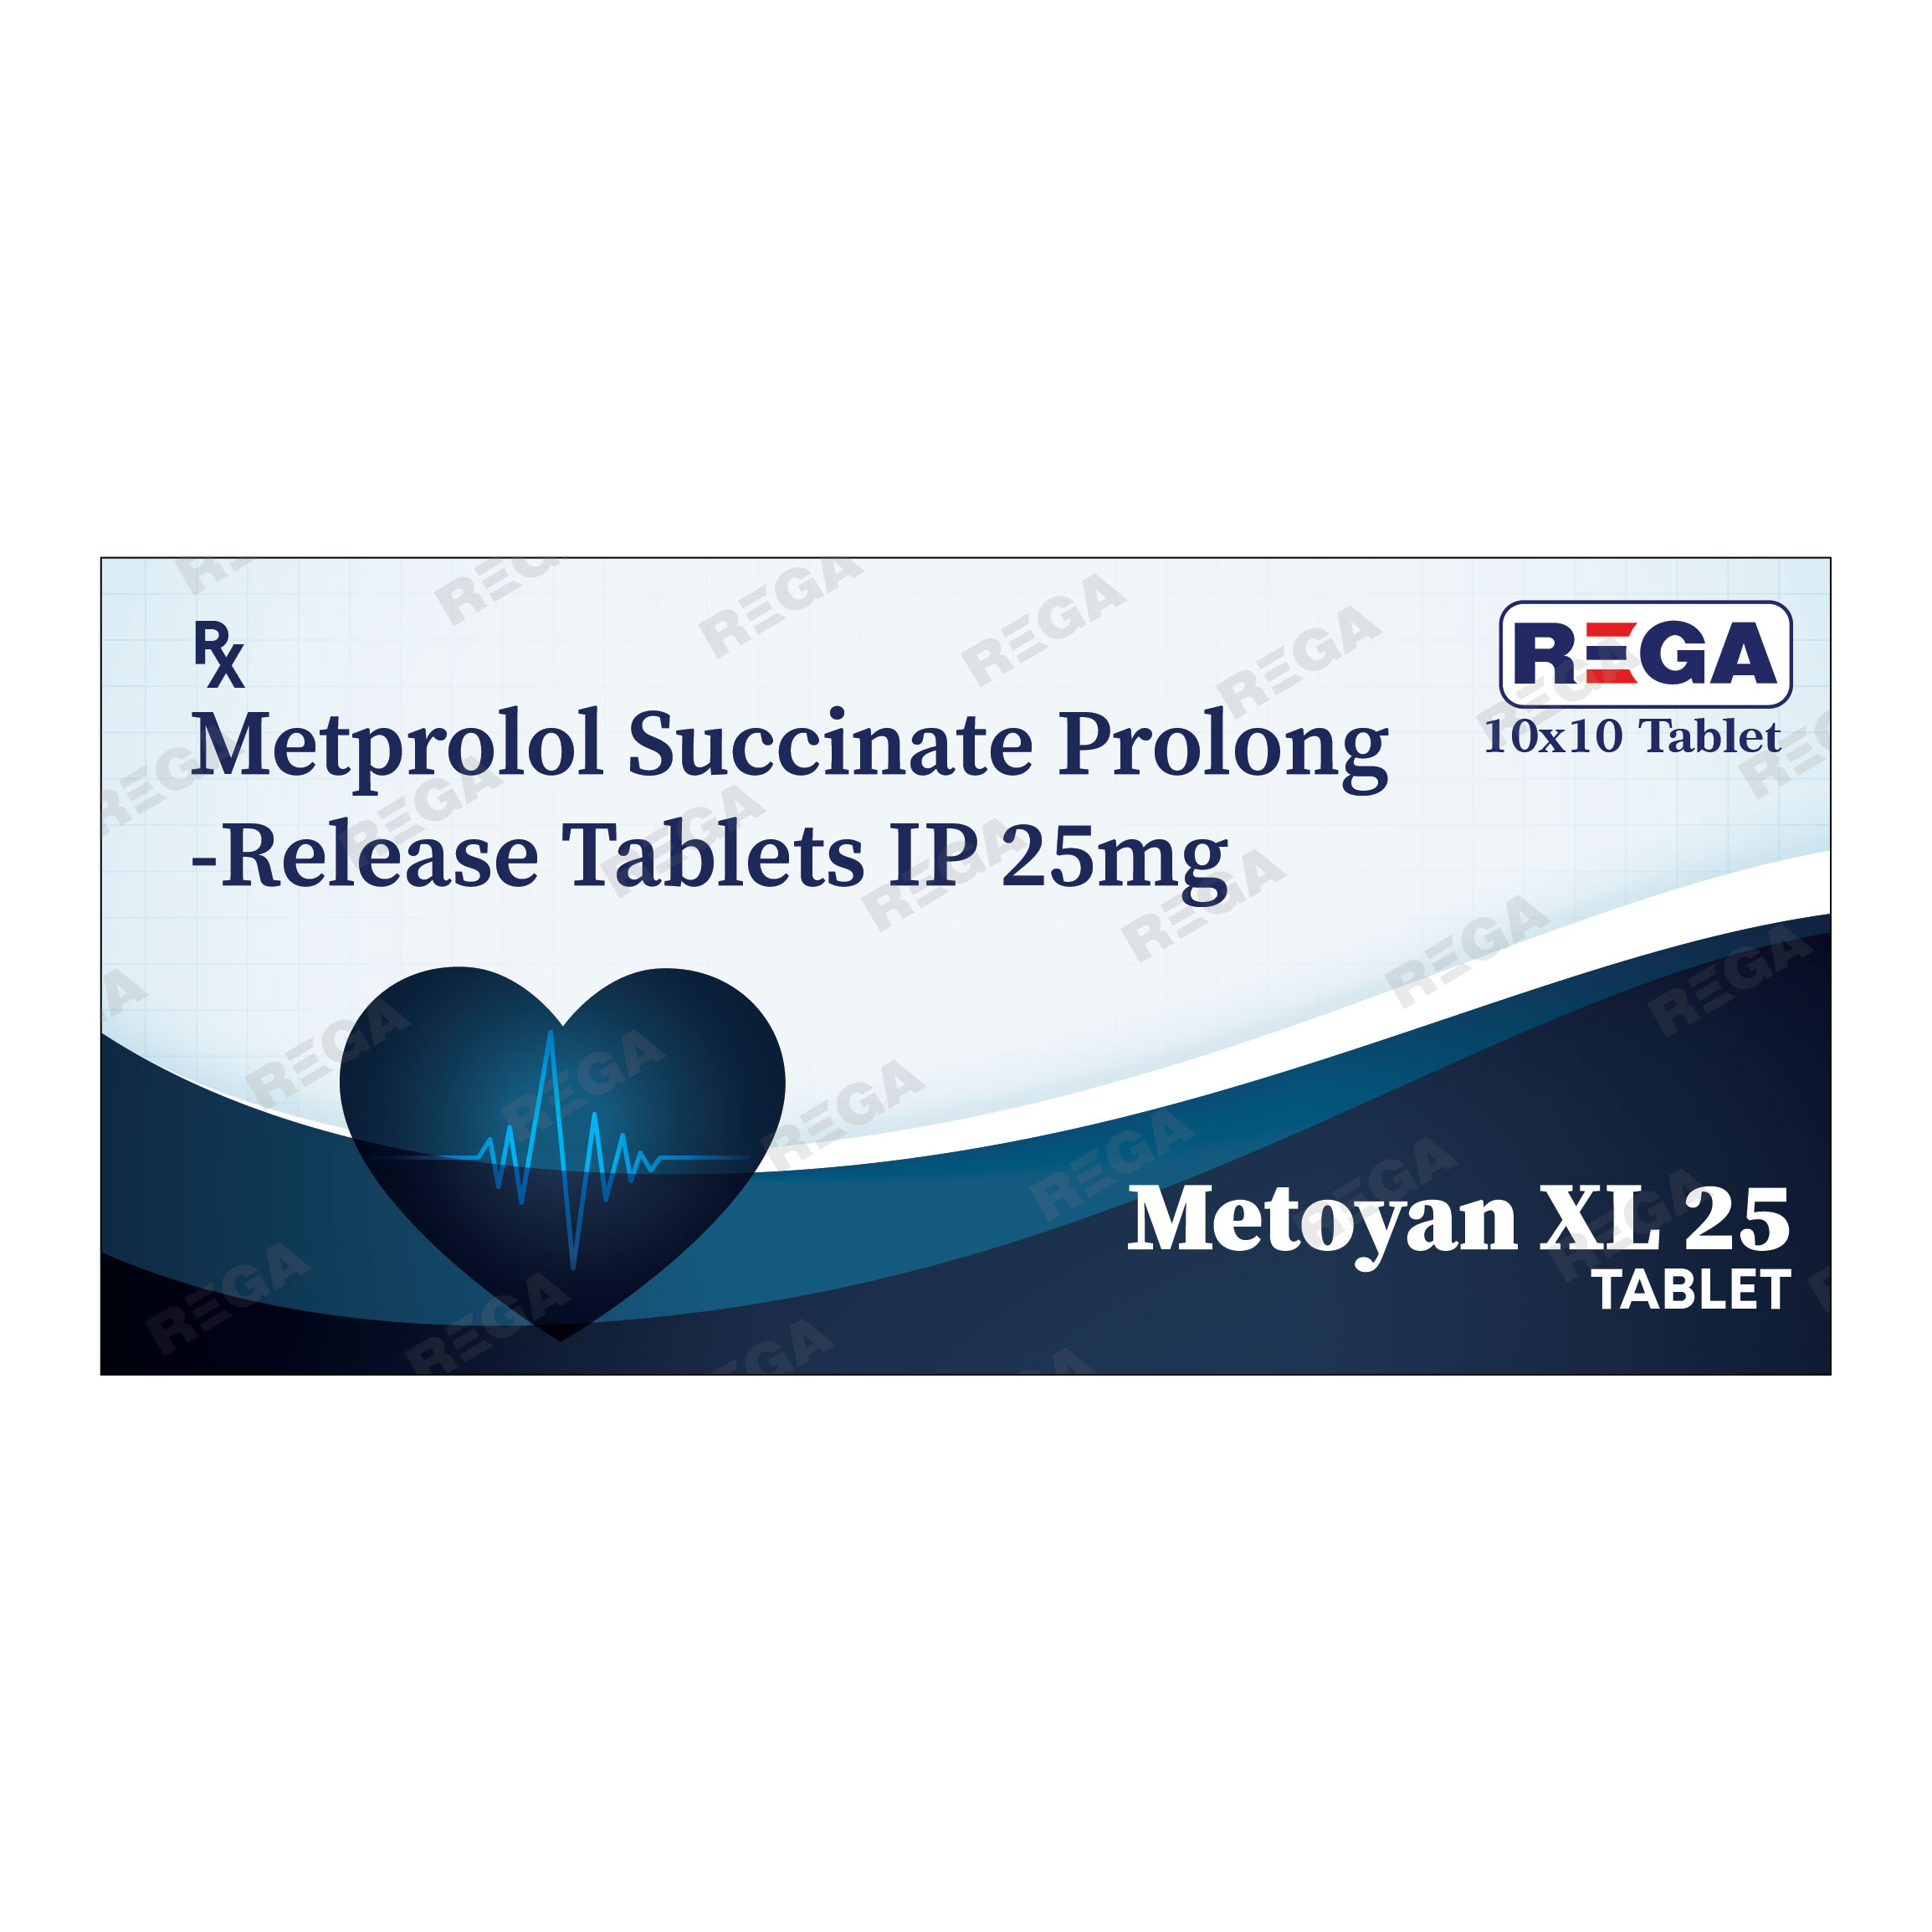 Metoprolol Succinate Prolong release  tablets 25 mg